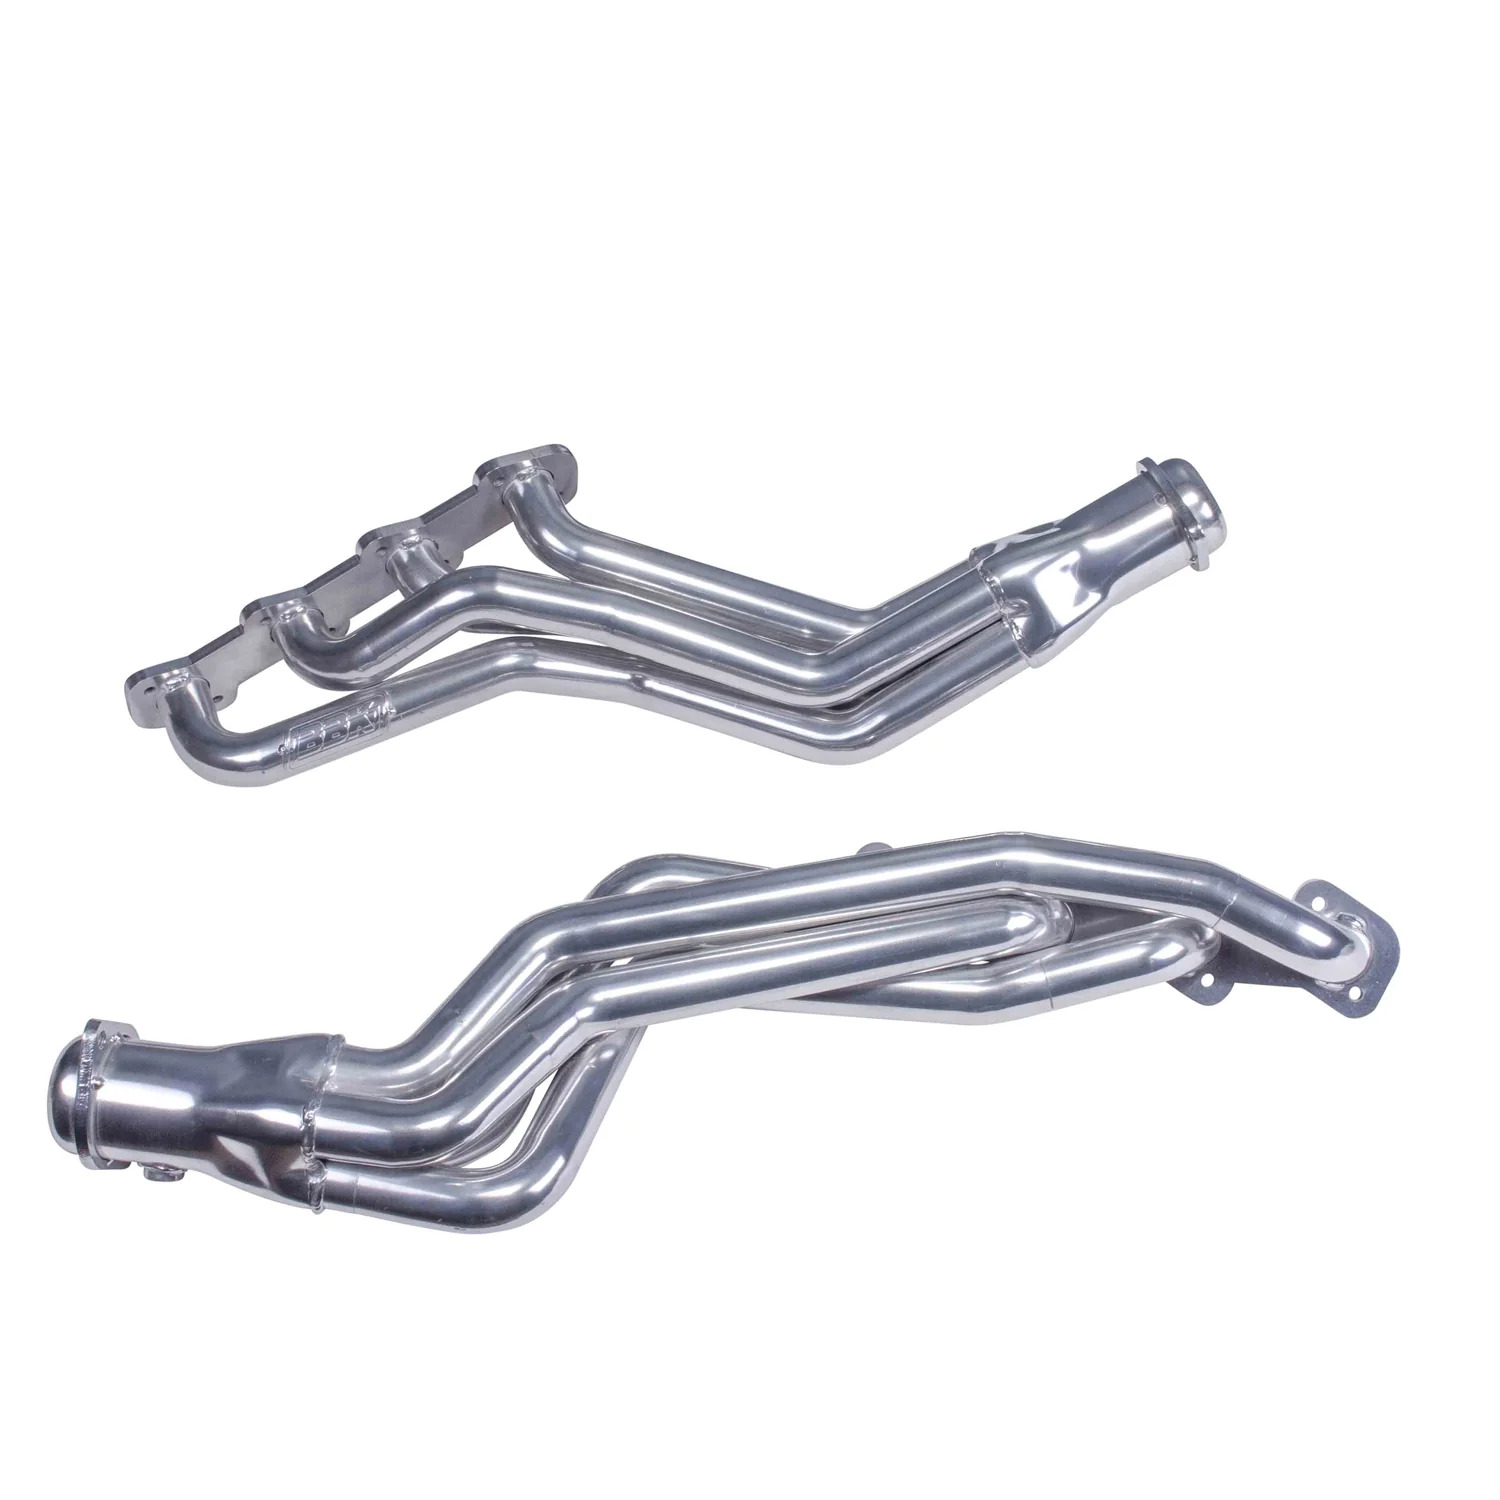 Ford F150 4.6 5.4 1-5/8 Full Length Exhaust Headers Polished Silver Ceramic 97-0